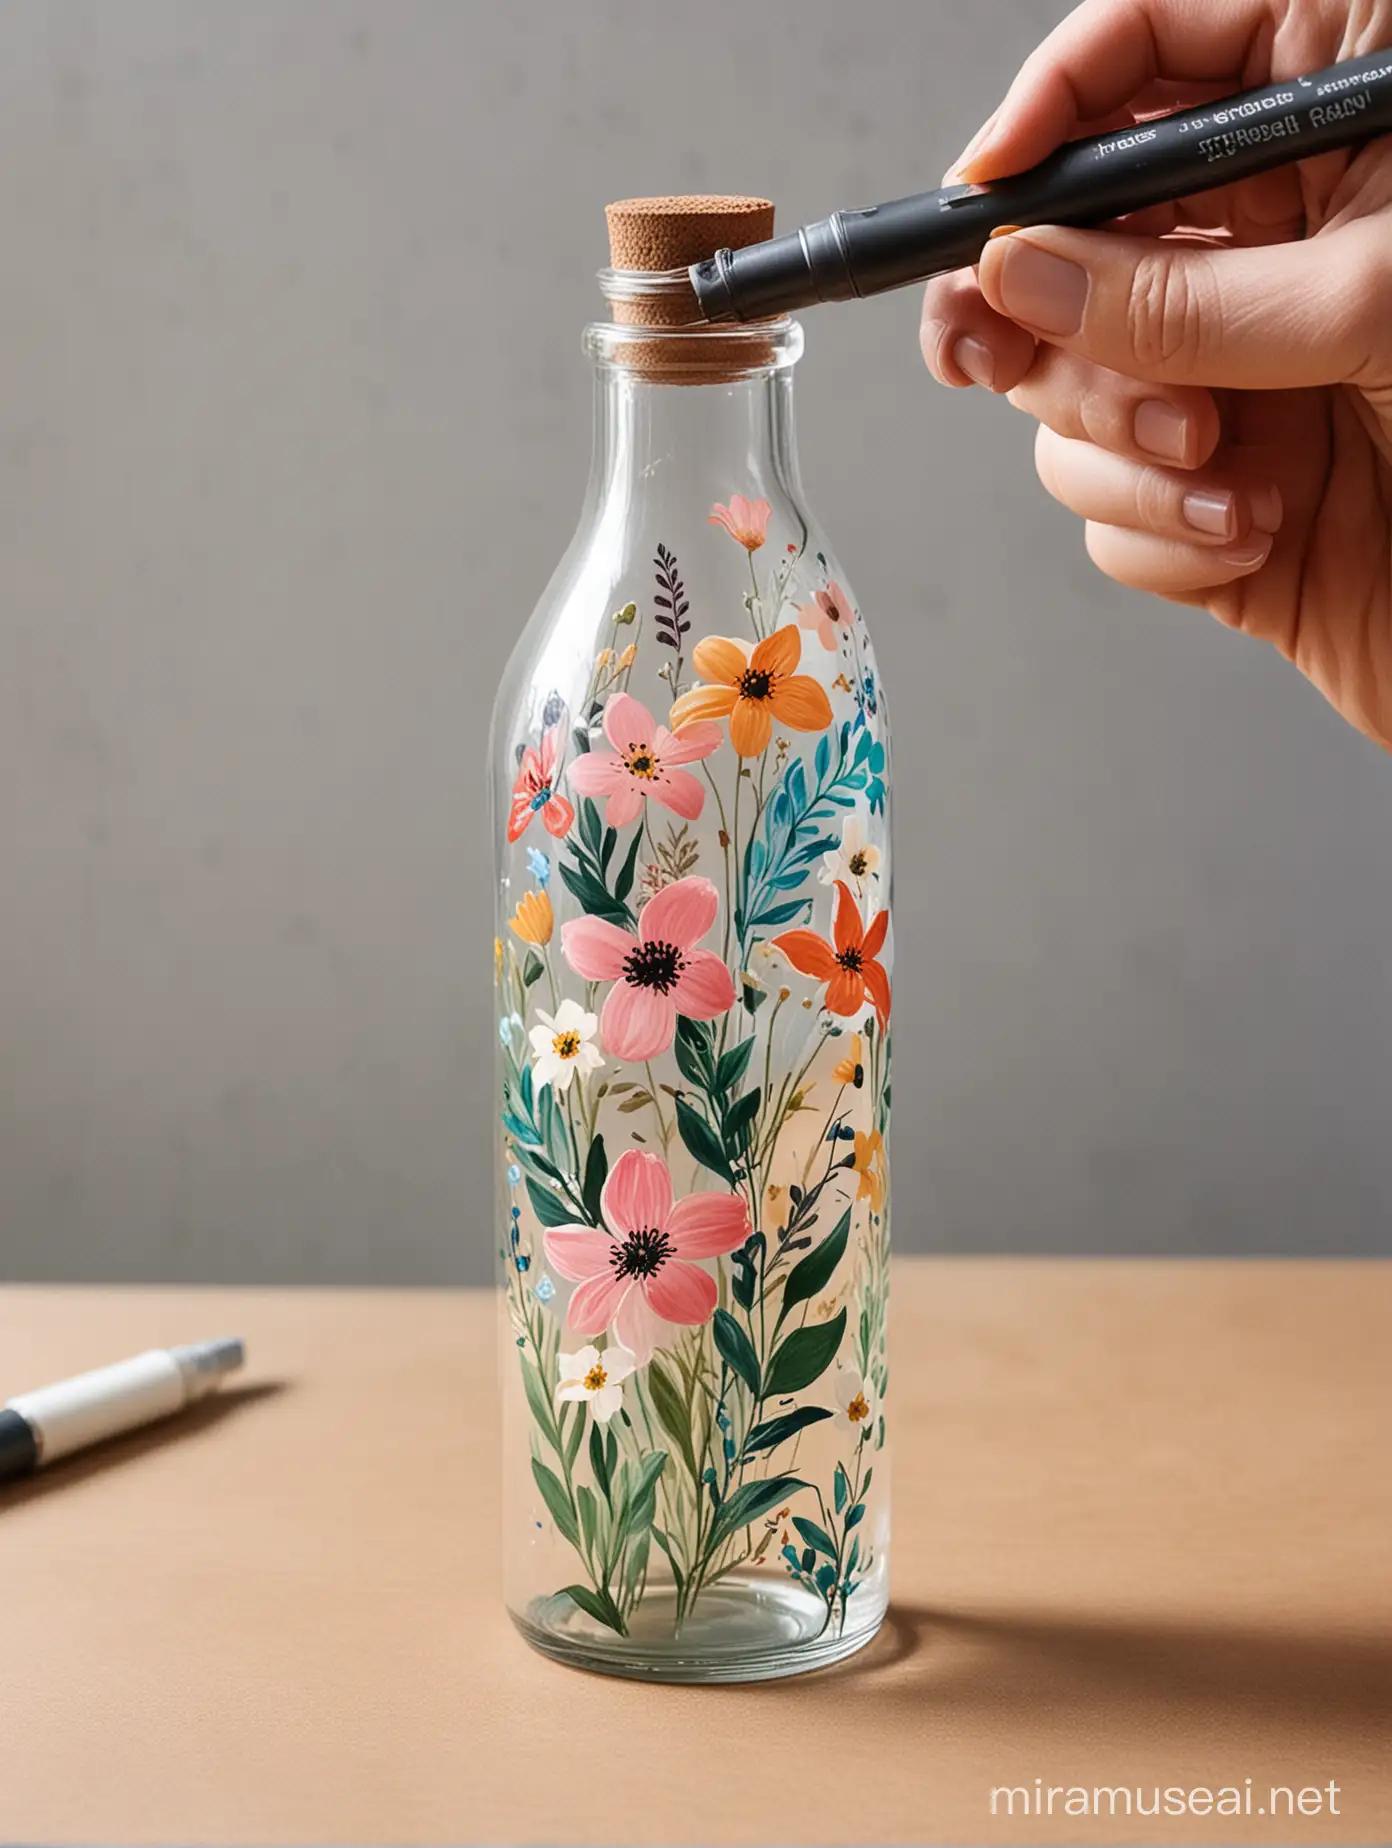 Artist Painting Floral Pattern on Glass Bottle with Acrylic Paints